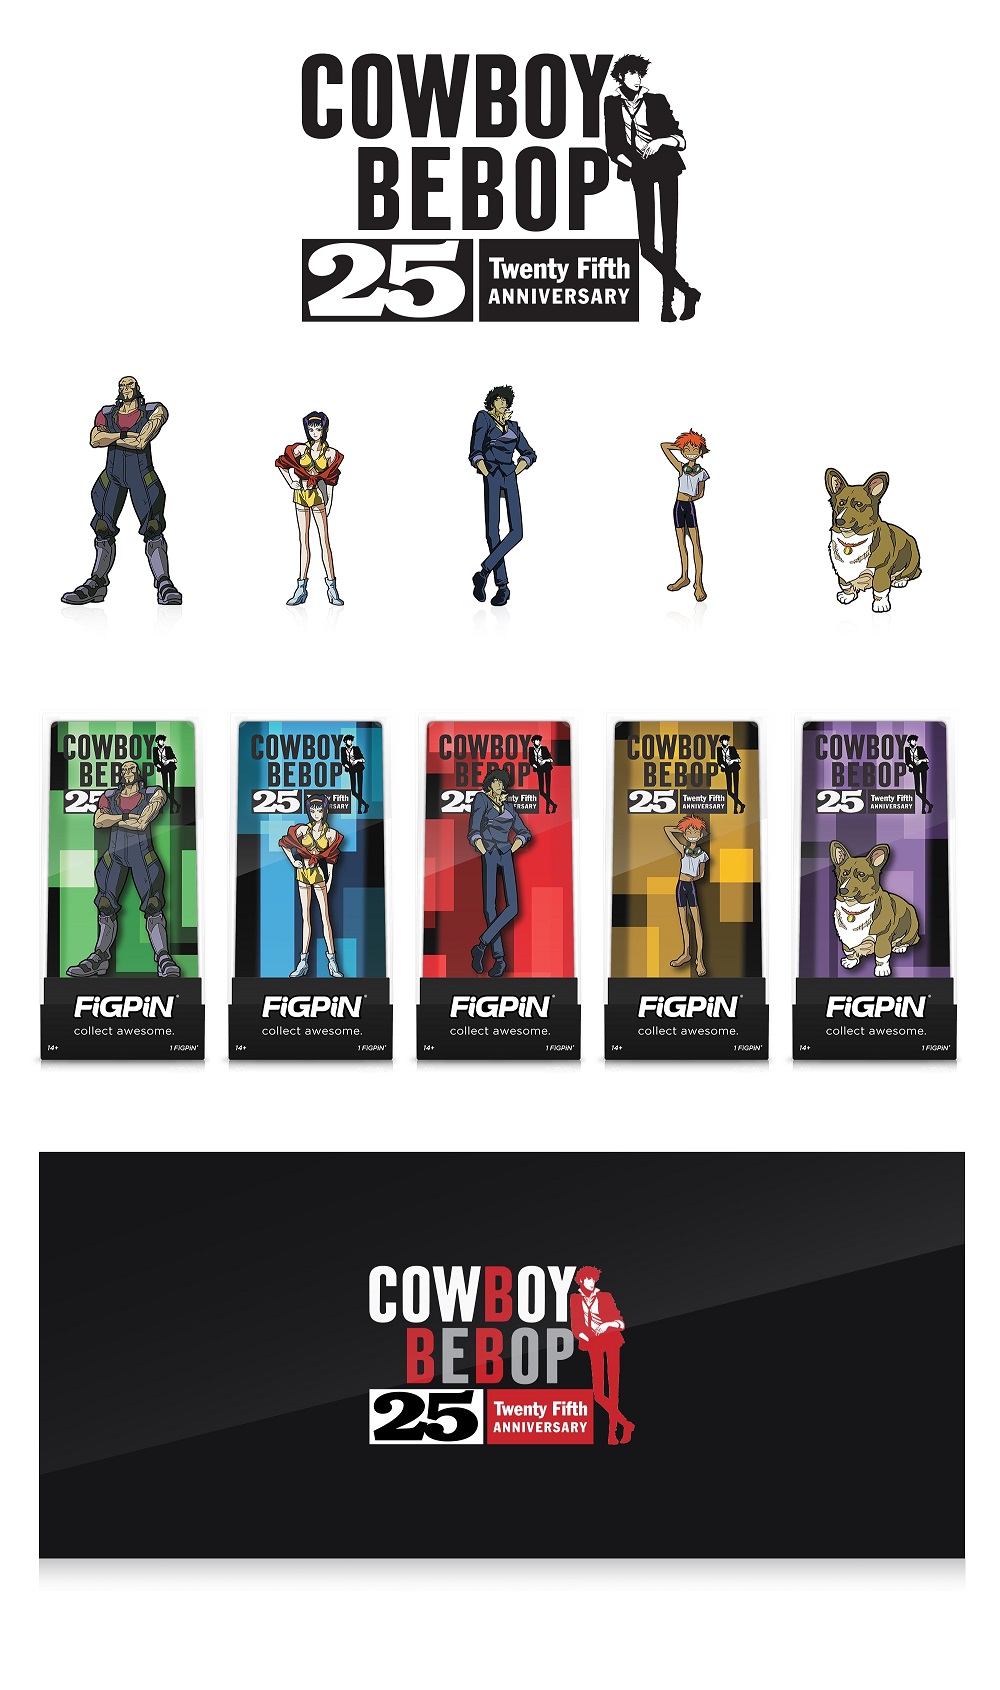 cowboy-bebop-25th-anniversary-figpin-collection-crunchyroll-exclusive image count 0